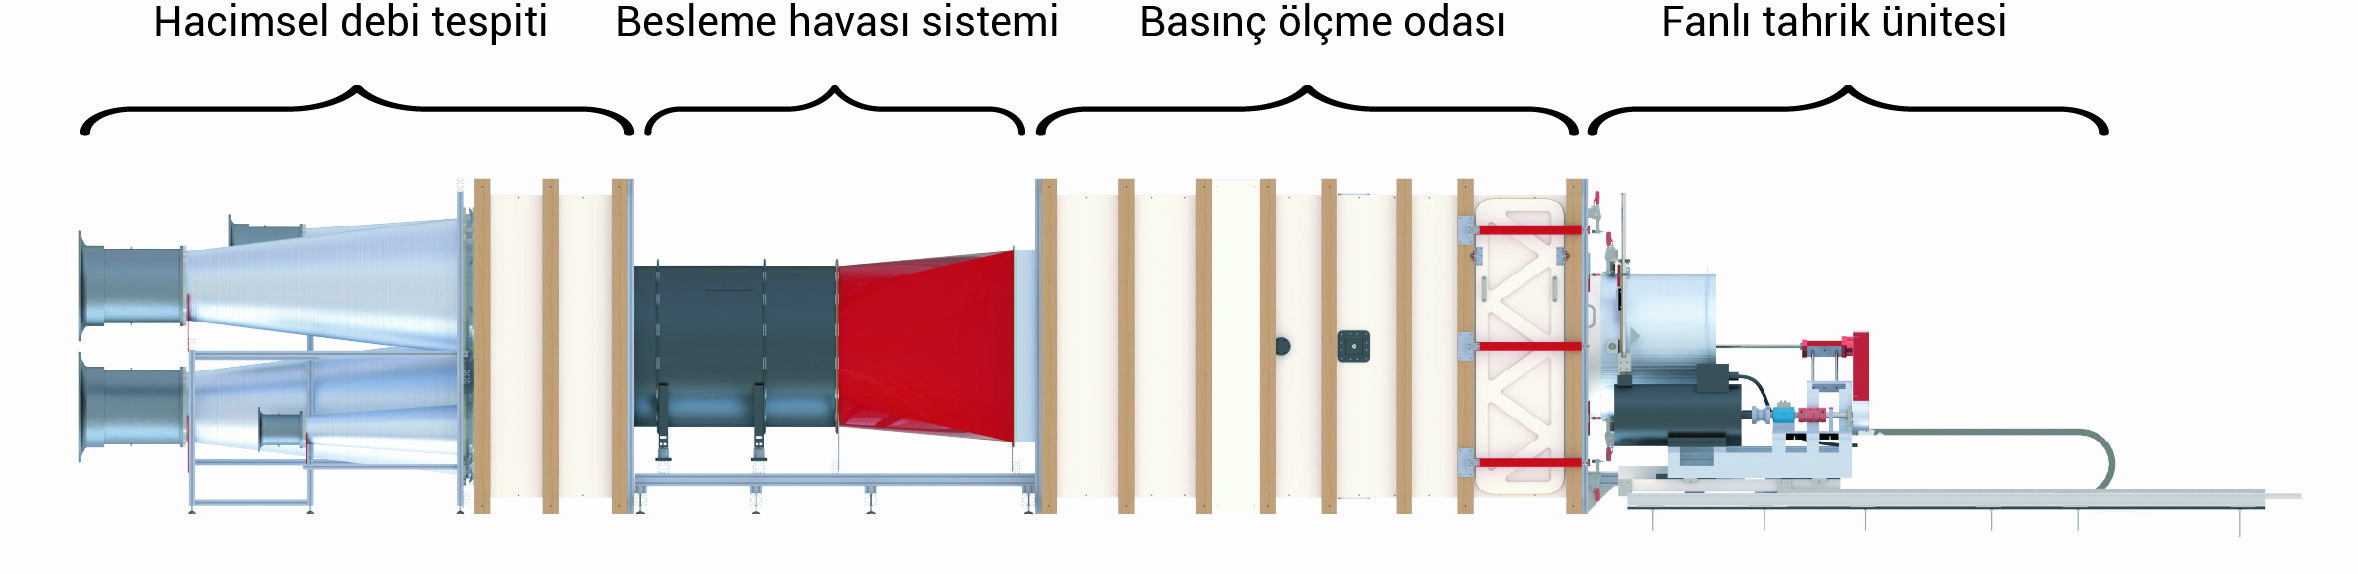 Diagram of the test chamber at Cleanfix.